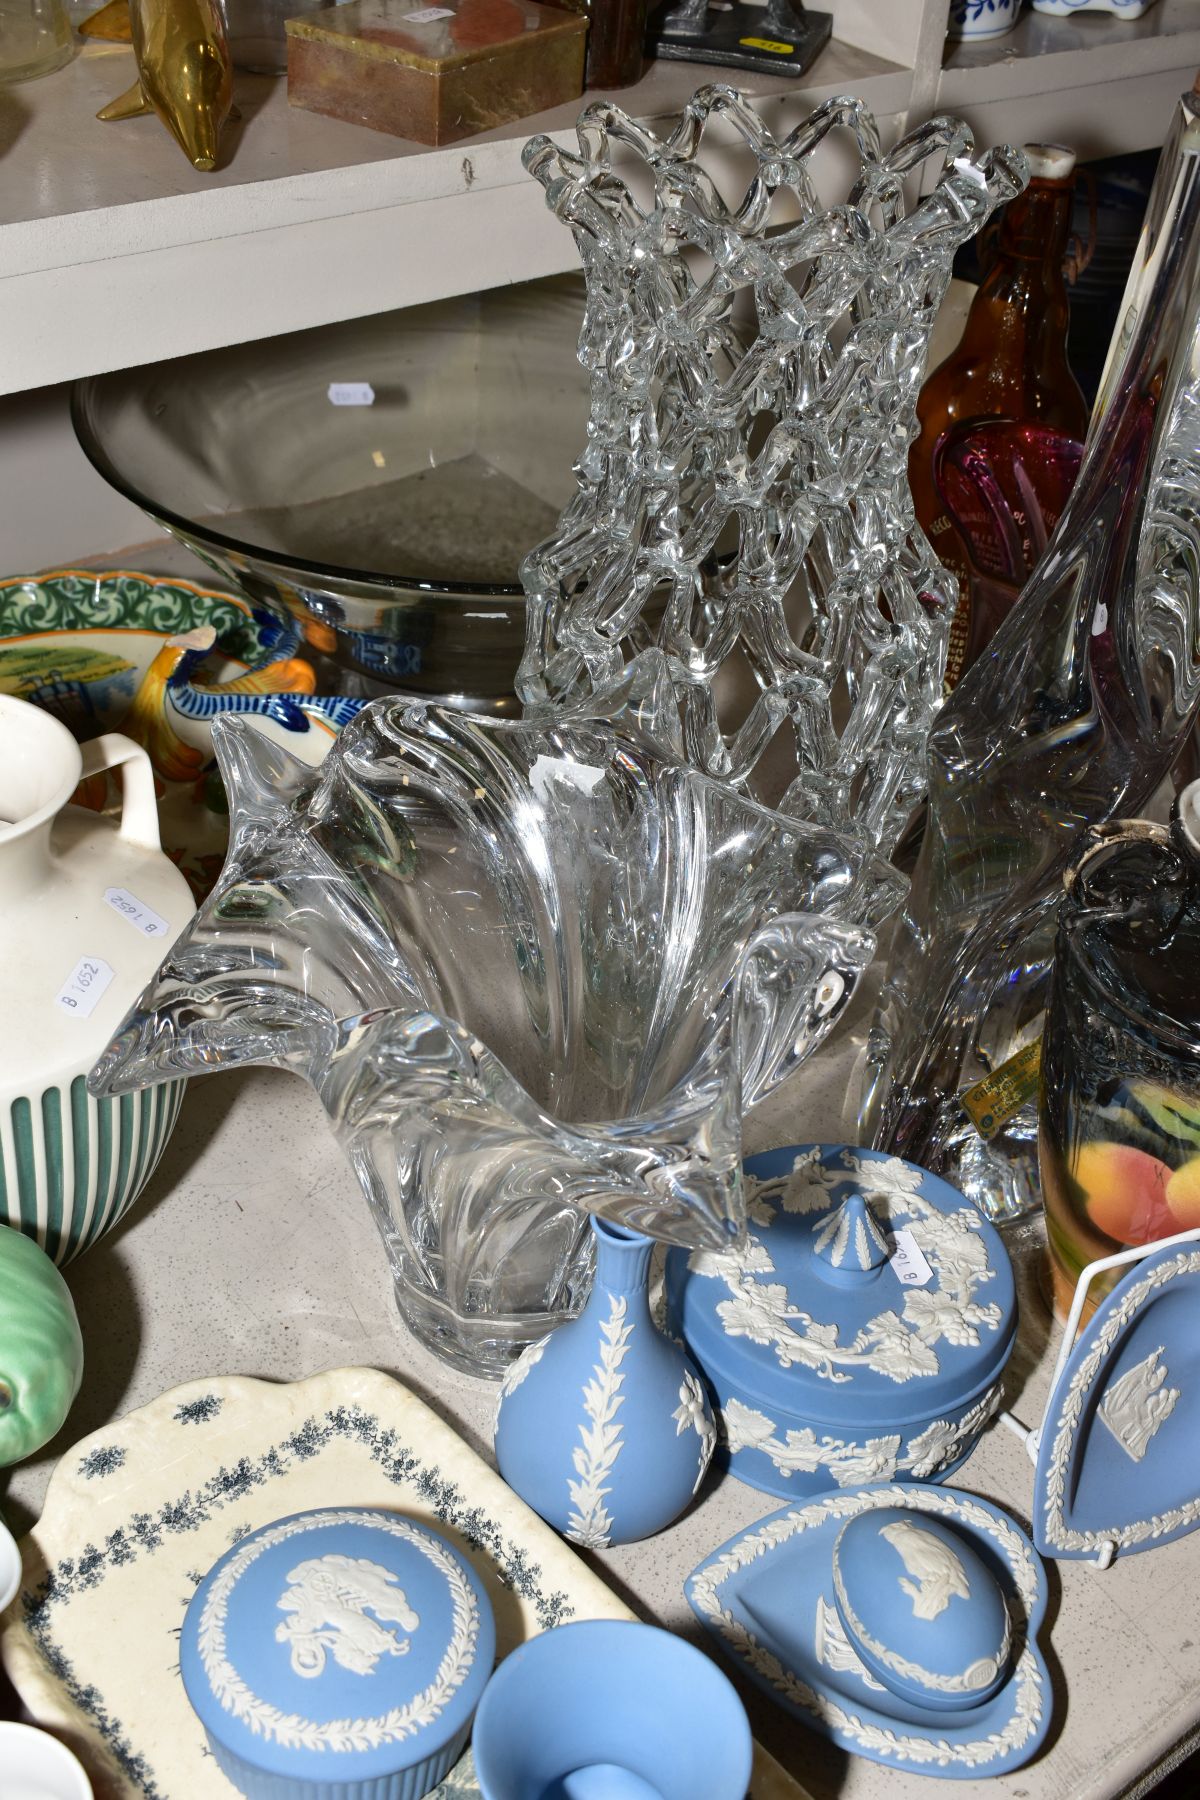 A GROUP OF CERAMICS AND GLASSWARE, including Wedgwood pale blue Jasperware, a Royal Worcester - Bild 5 aus 5